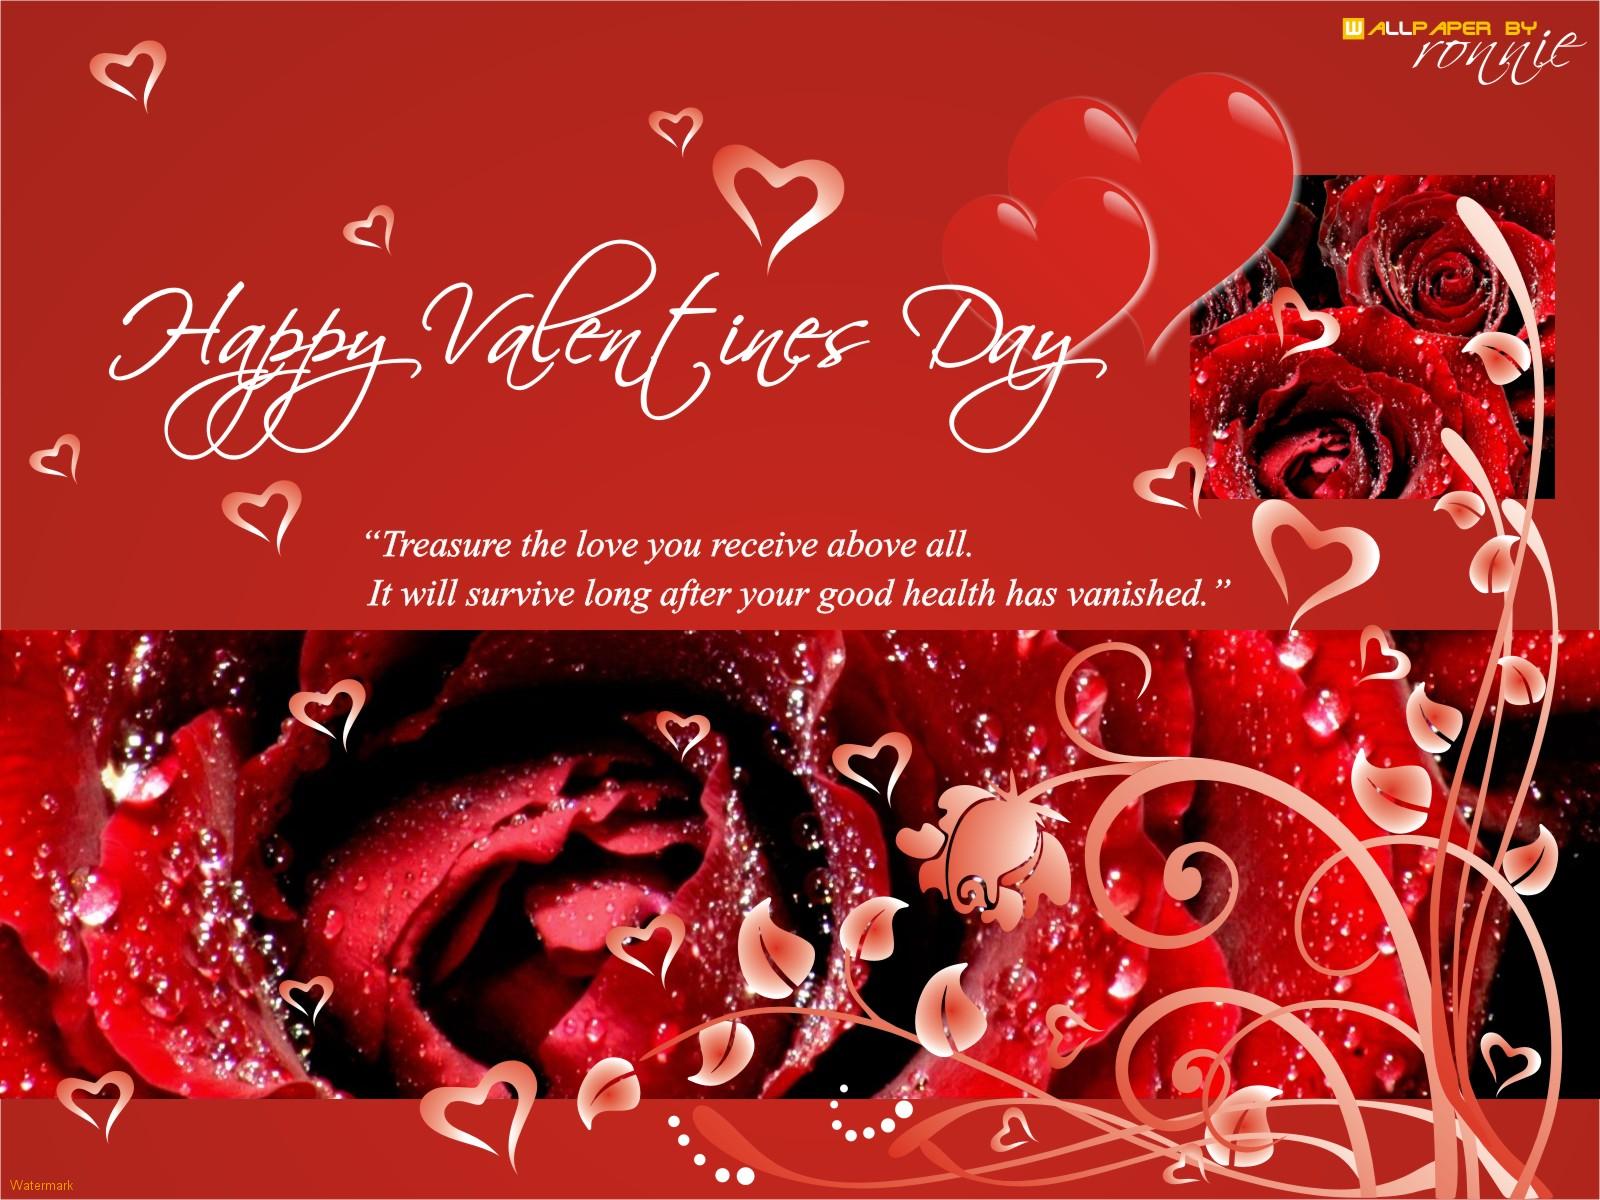 wallpaper-backgrounds-valentines-day-heart-wallpapers